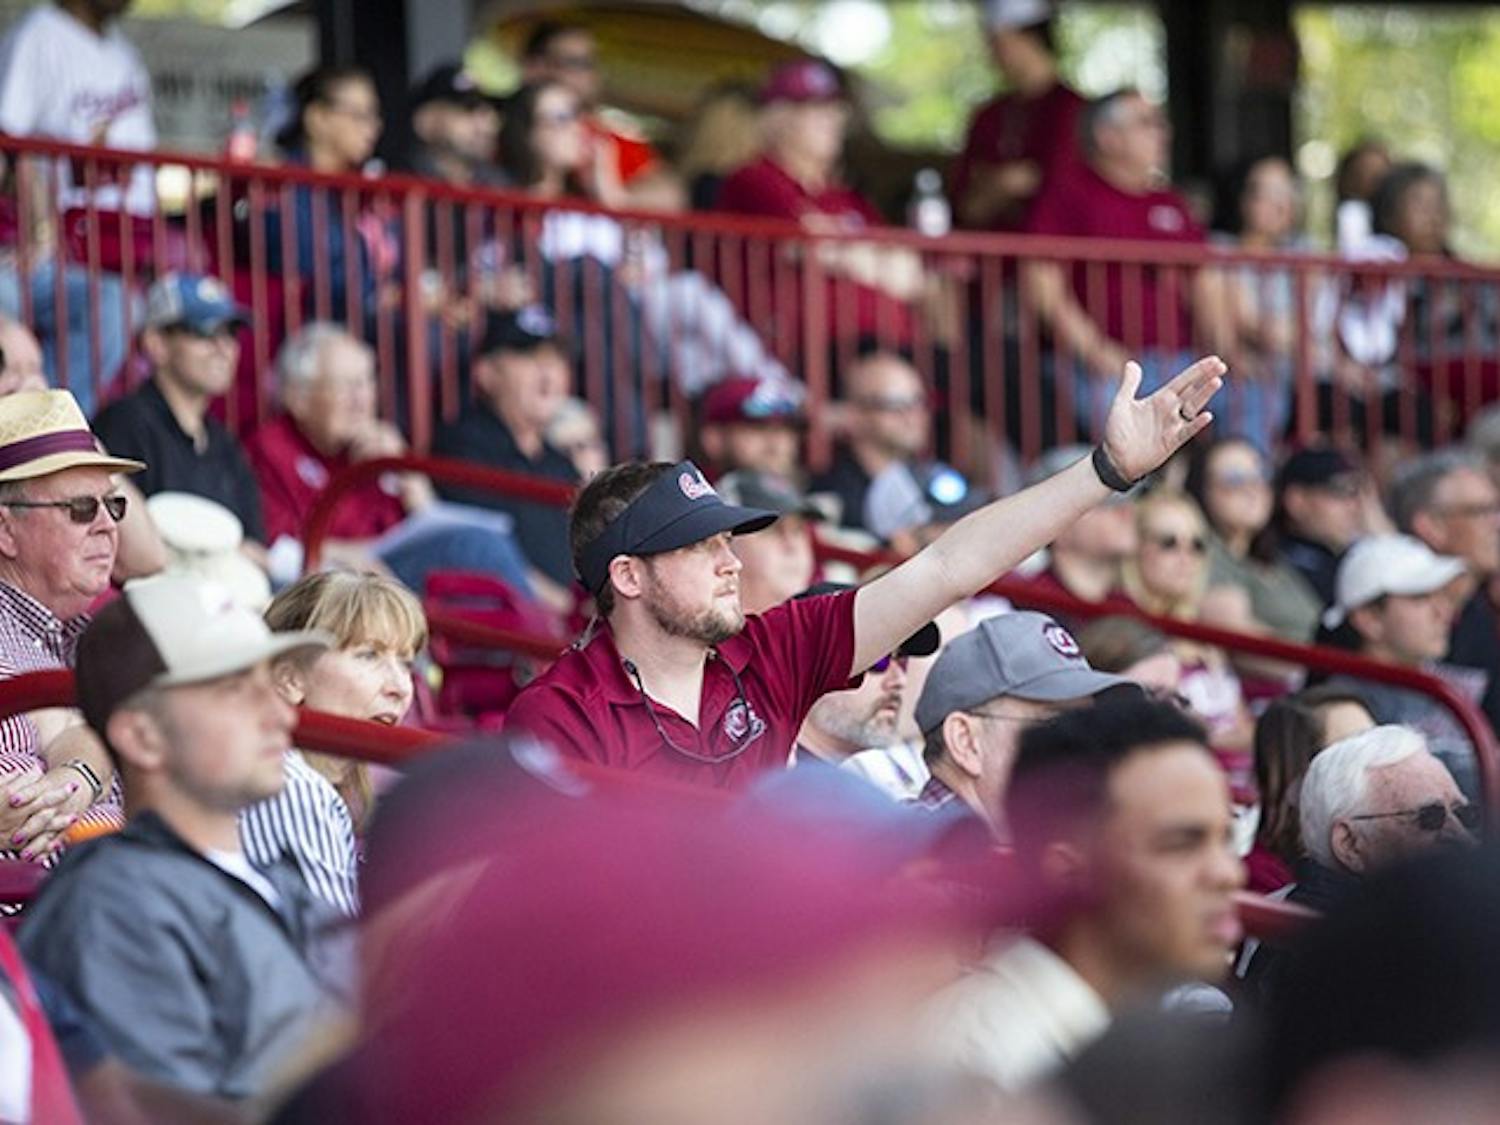 Upset with a call, a South Carolina fan throws their hands up in frustration during the second game against Auburn at Founders Park in 2019.